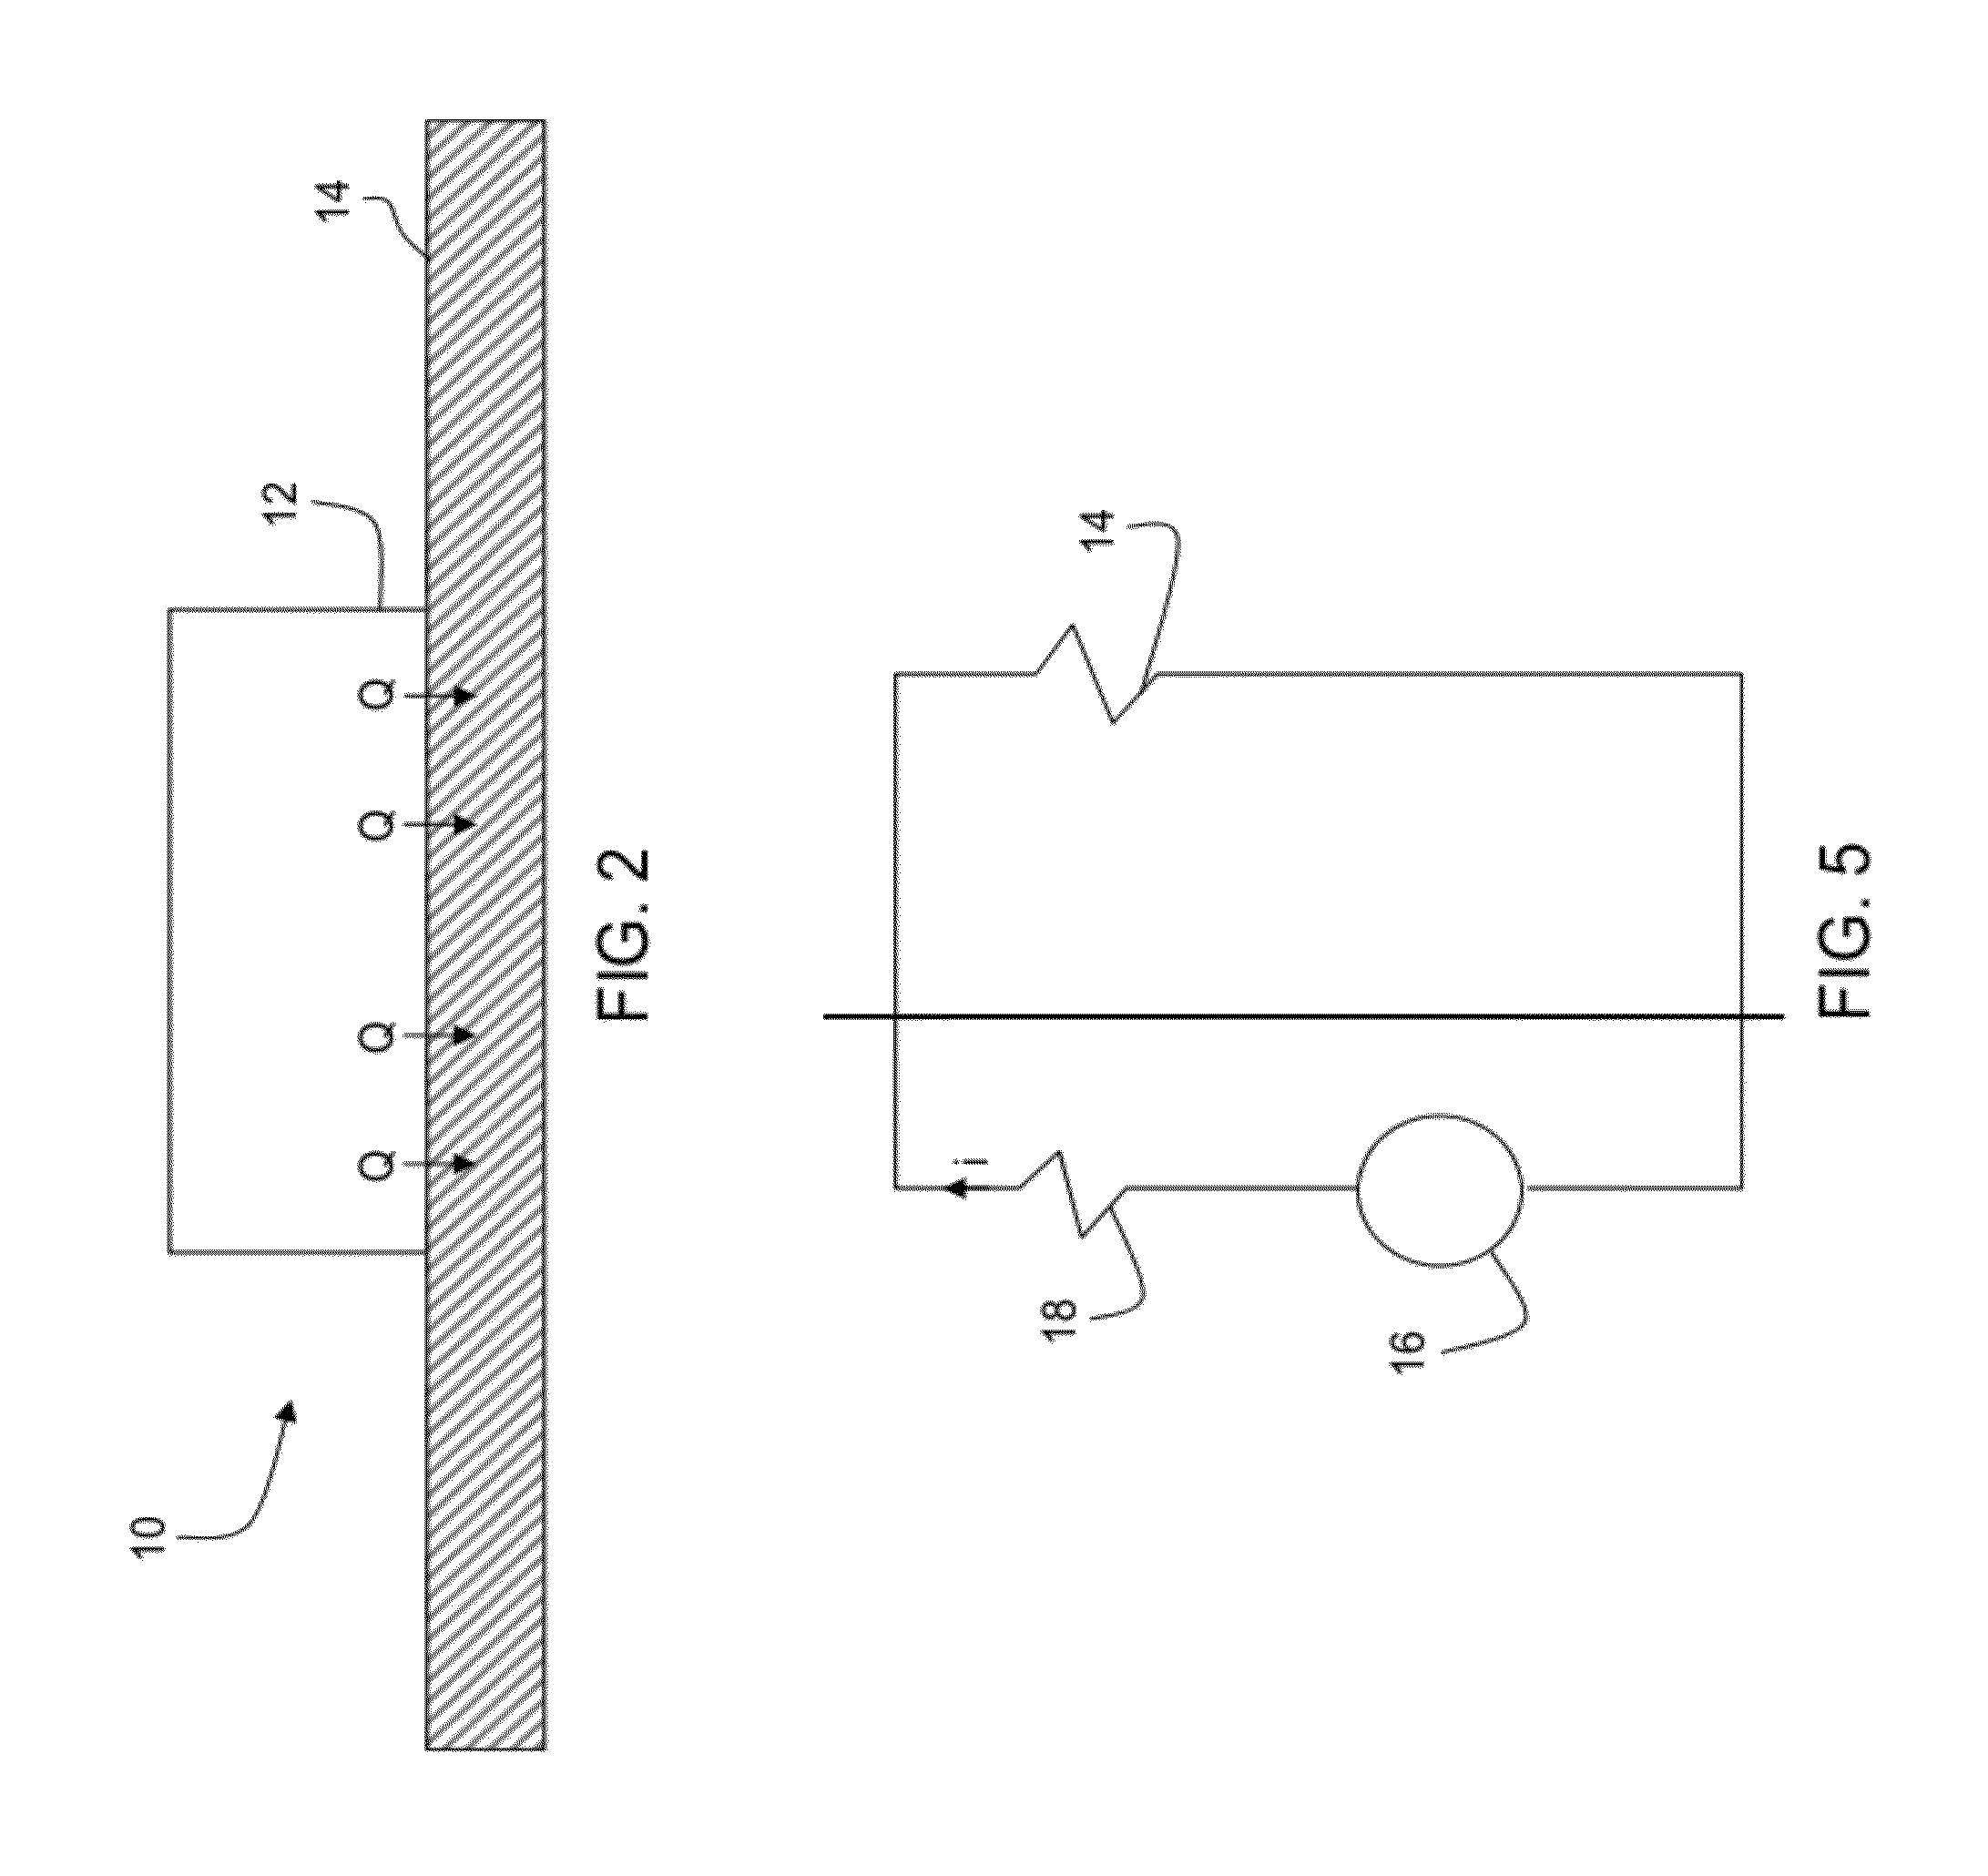 Thermal Impedance Matching Using Common Materials